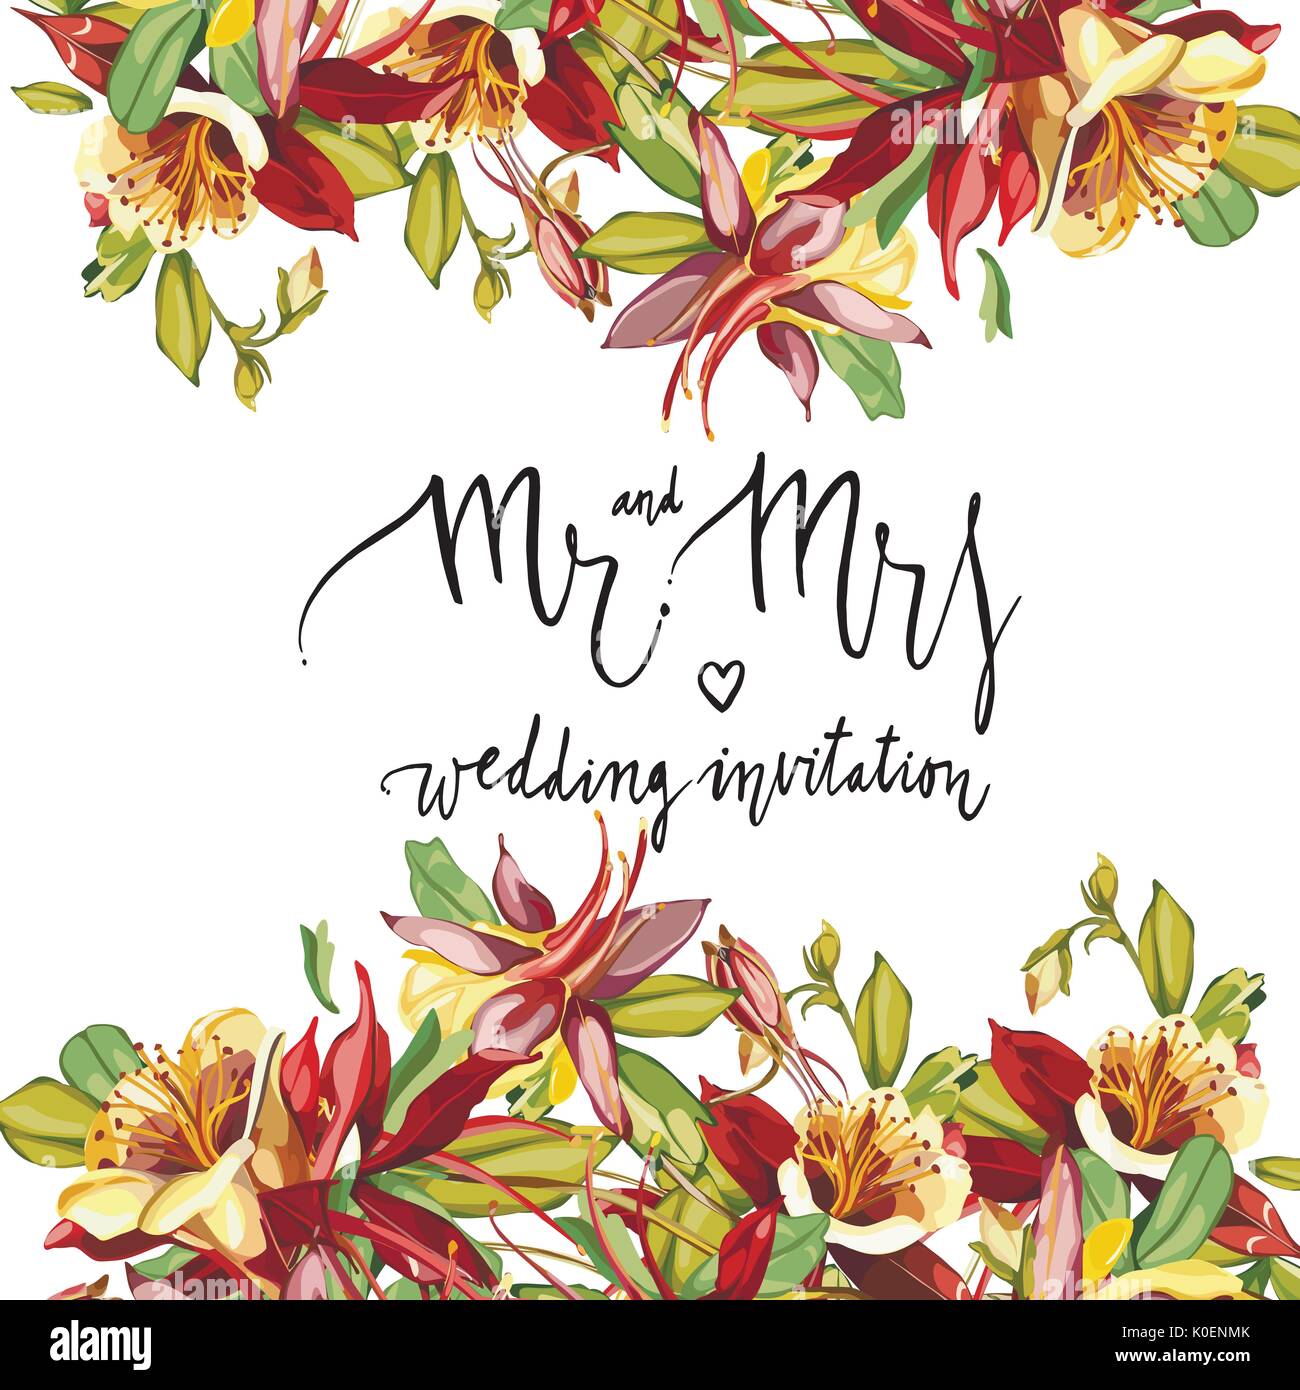 Floral Frame With Red Flowers On Light Background Greeting Card Or Template For Wedding S Day Design Lettering Mr And Mrs Wedding Invitation Stock Vector Image Art Alamy